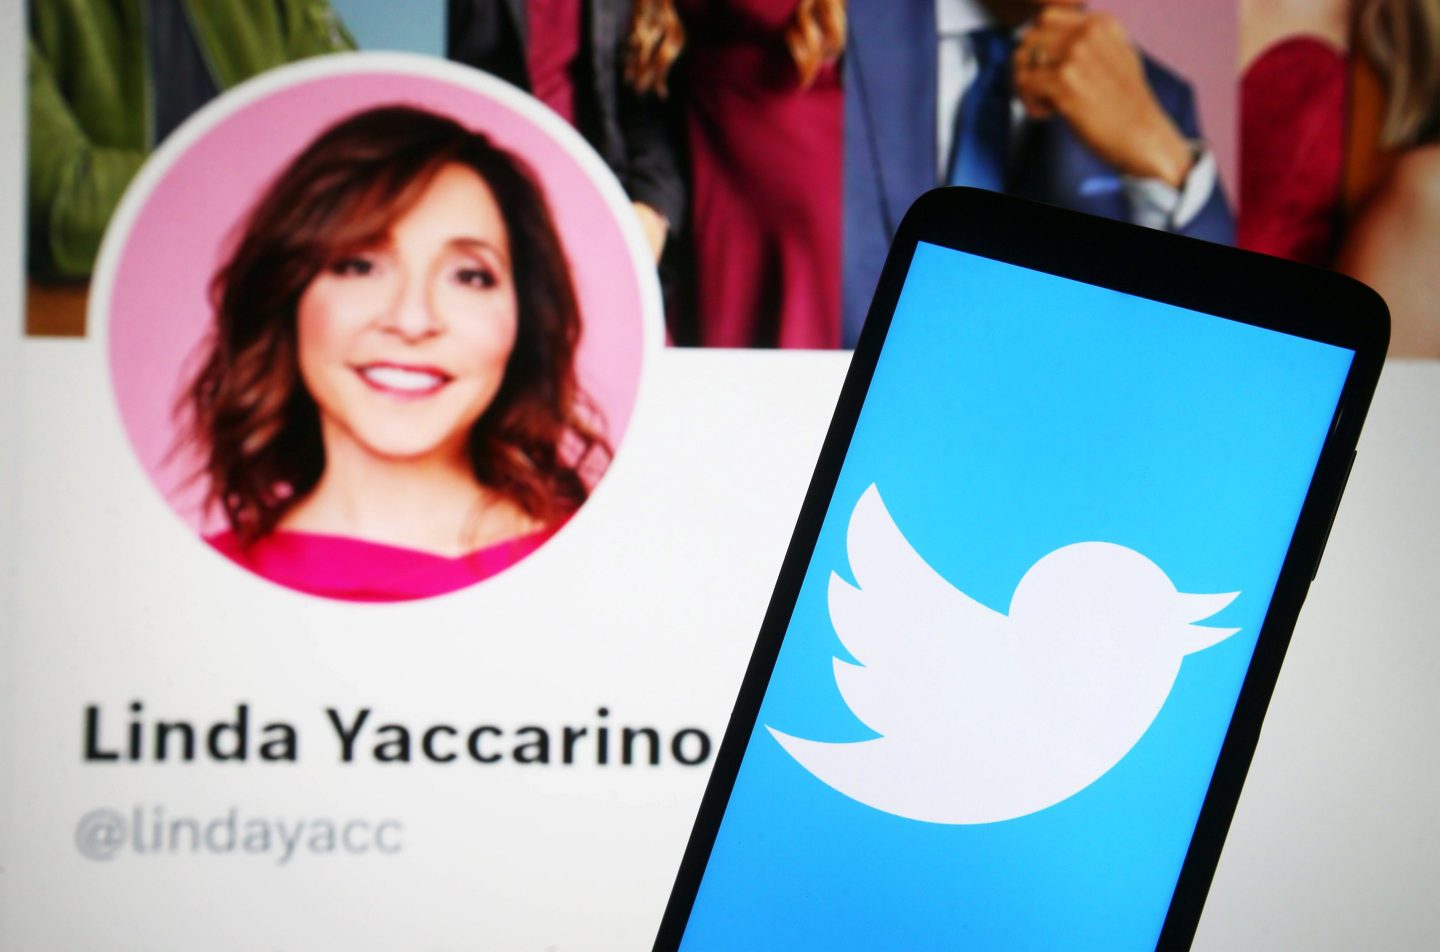 a Twitter logo is seen on a smartphone and Linda Yaccarino Twitter webpage on a pc screen